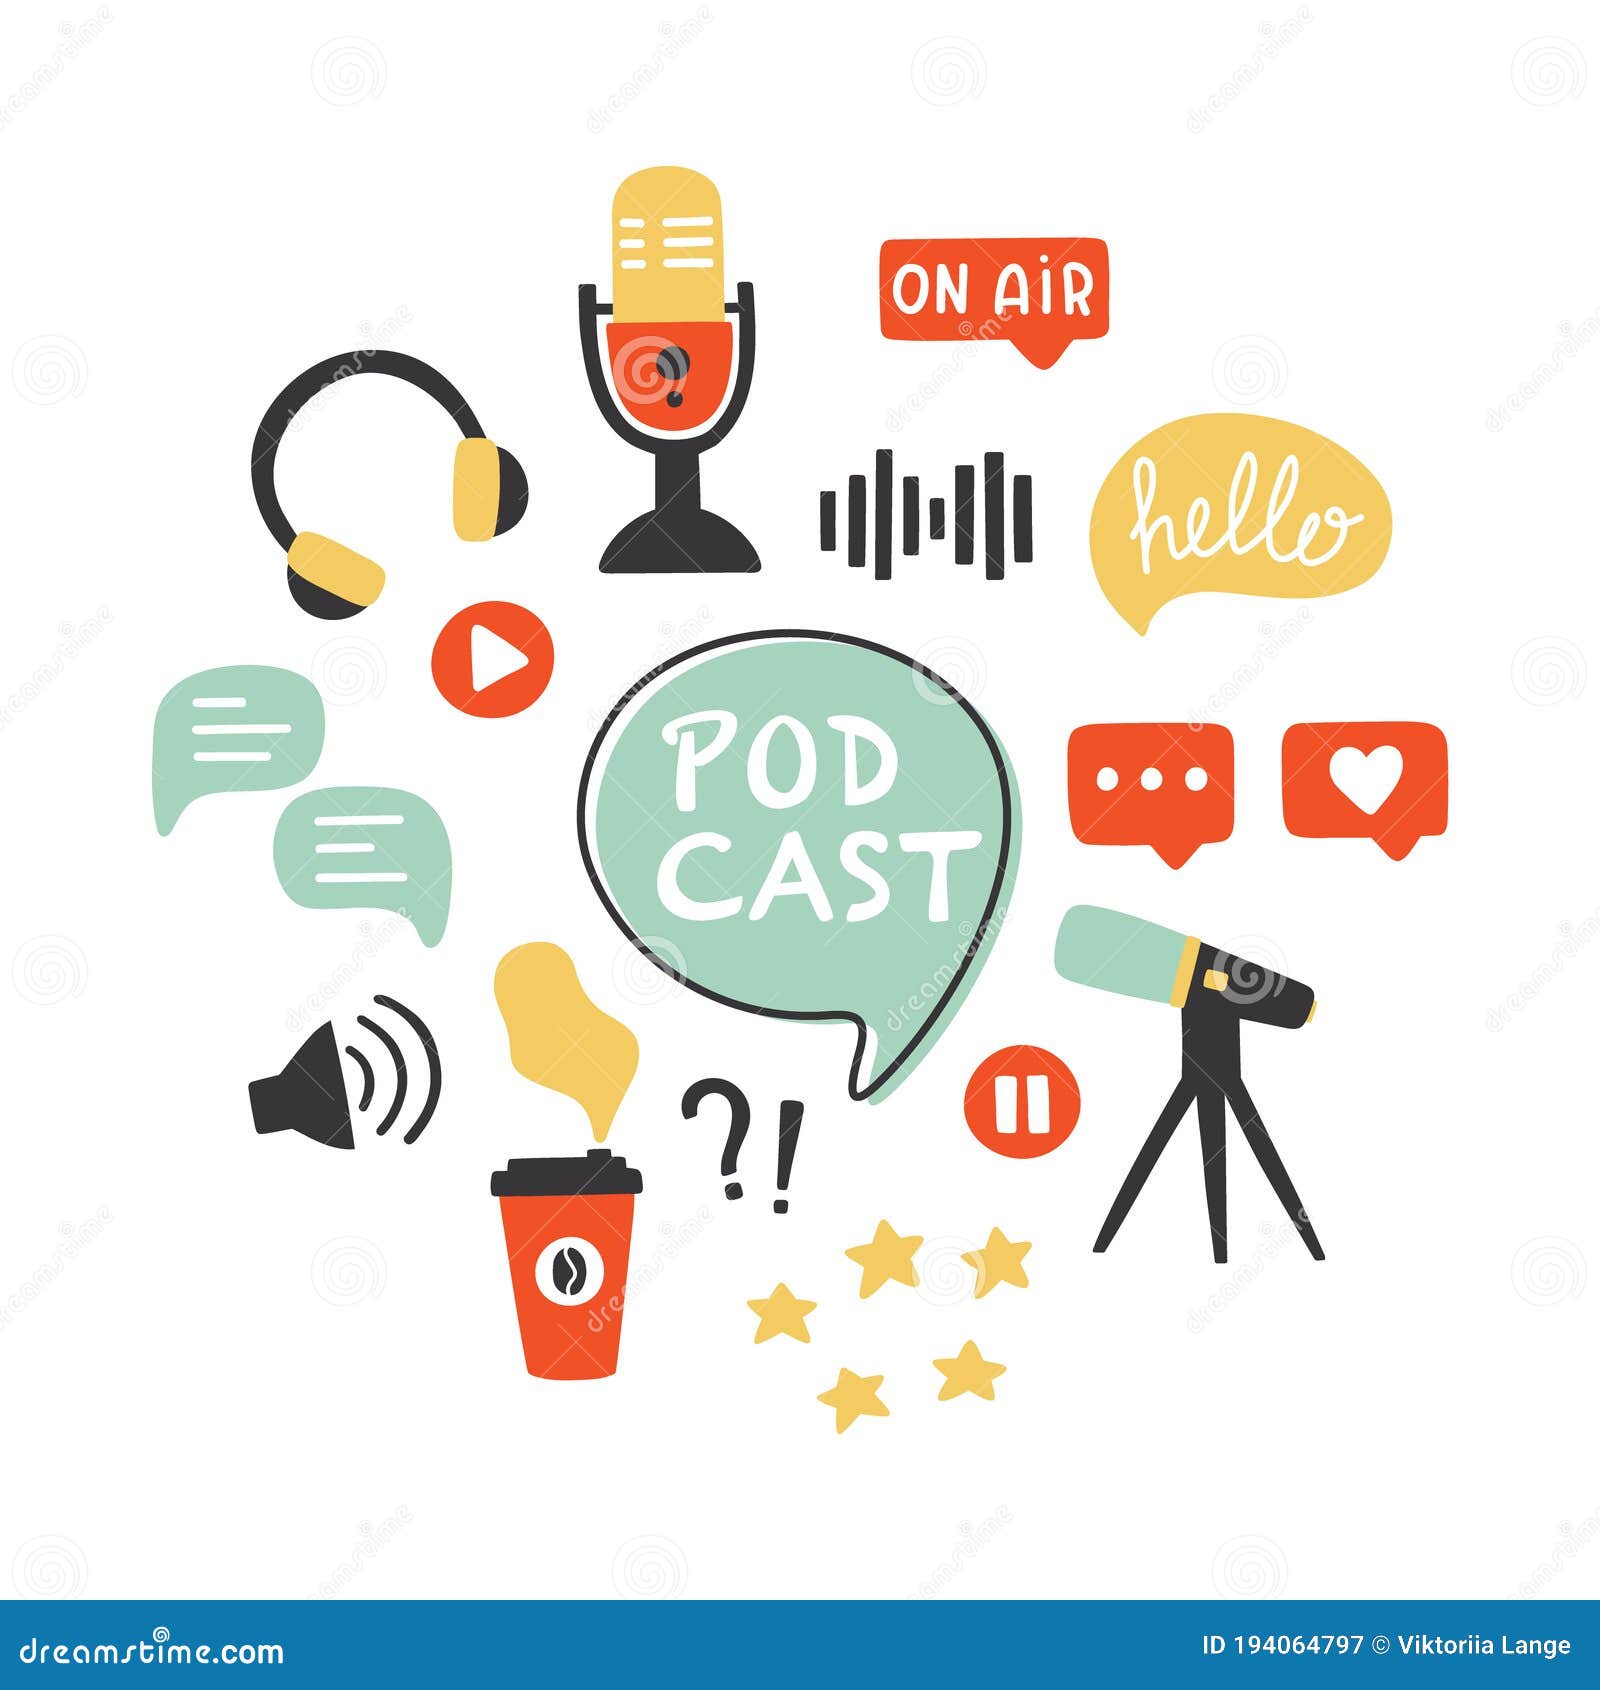 podcast icons set. podcasting s collection: microphone, headphones, loudspeaker, speech bubbles, rating stars.